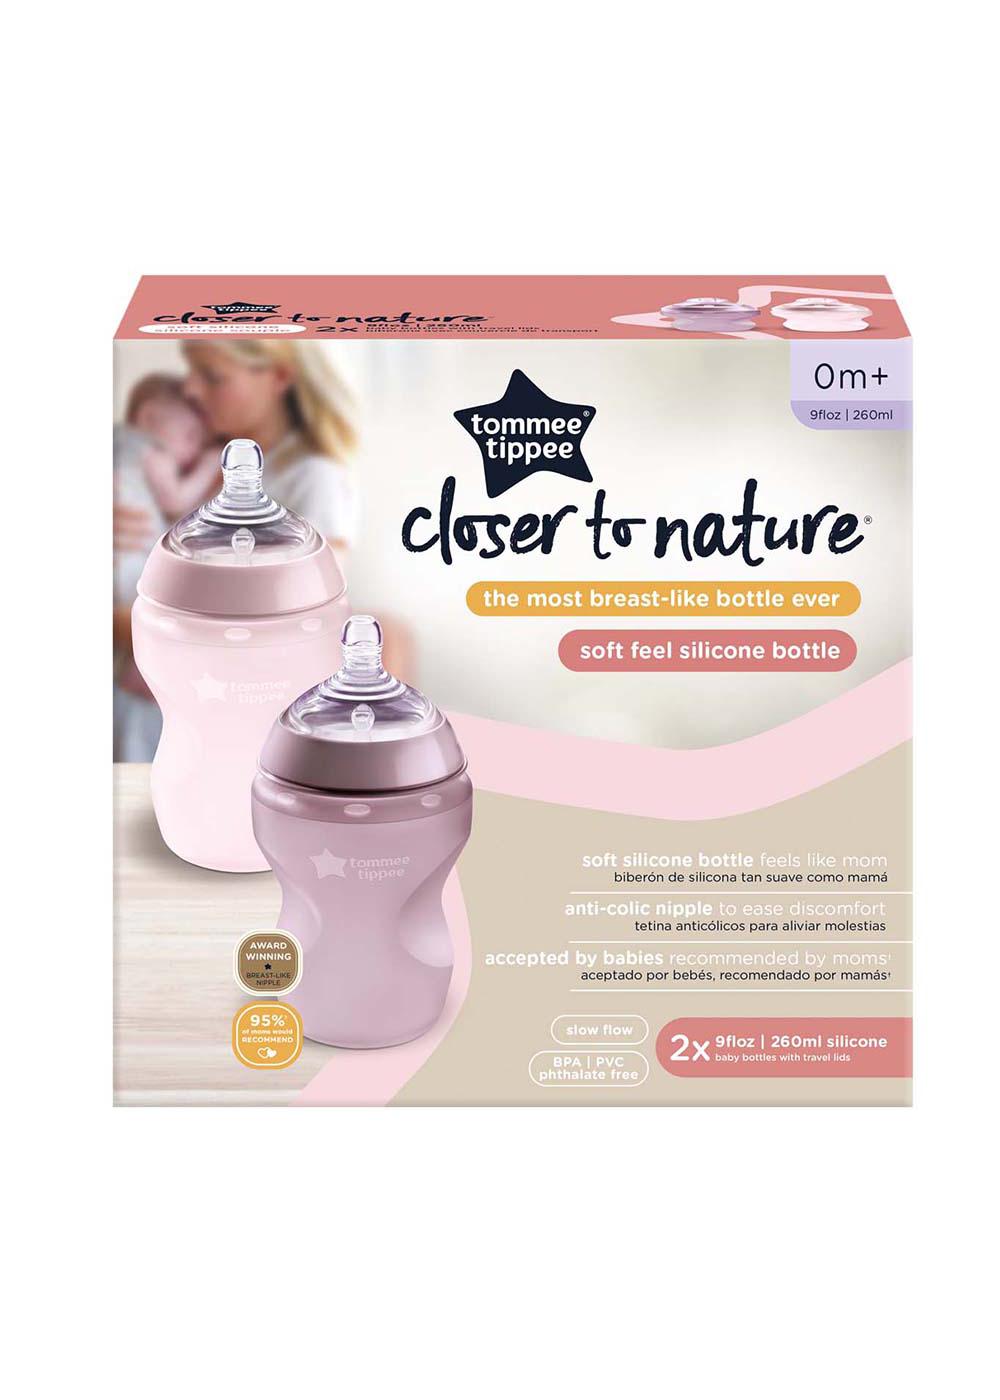 Tommee Tippee Closer To Nature 9 oz Silicone Bottles - Shop Bottles at H-E-B